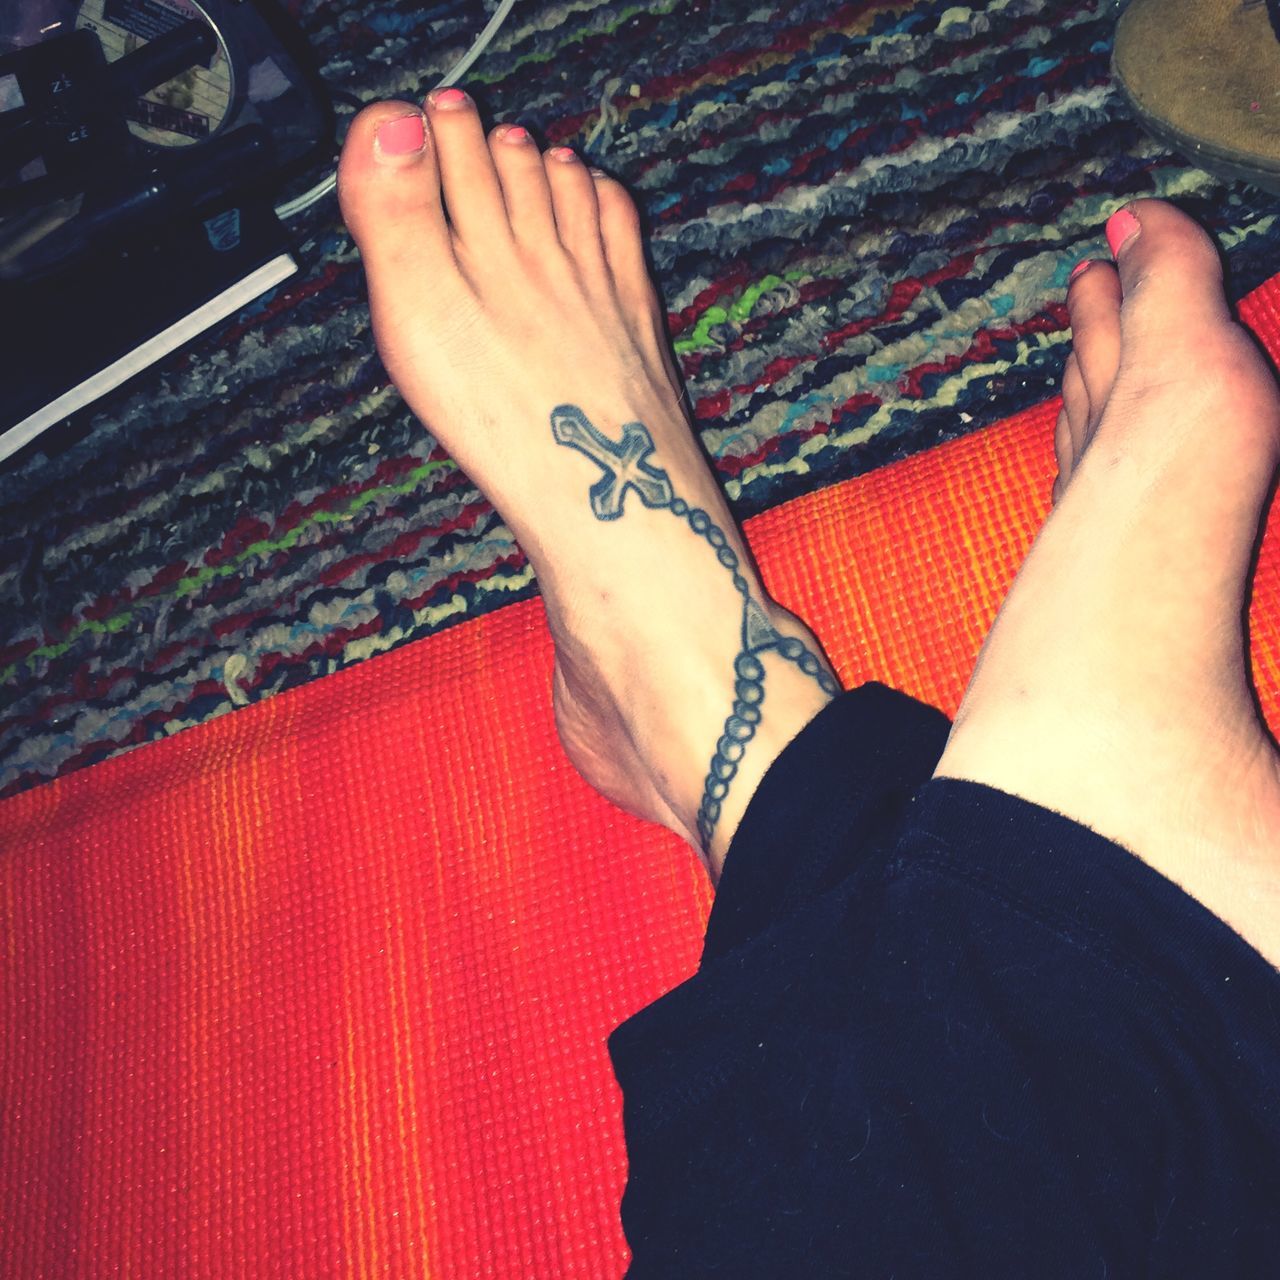 person, lifestyles, low section, part of, leisure activity, personal perspective, human foot, indoors, barefoot, human finger, fashion, cropped, sitting, holding, high angle view